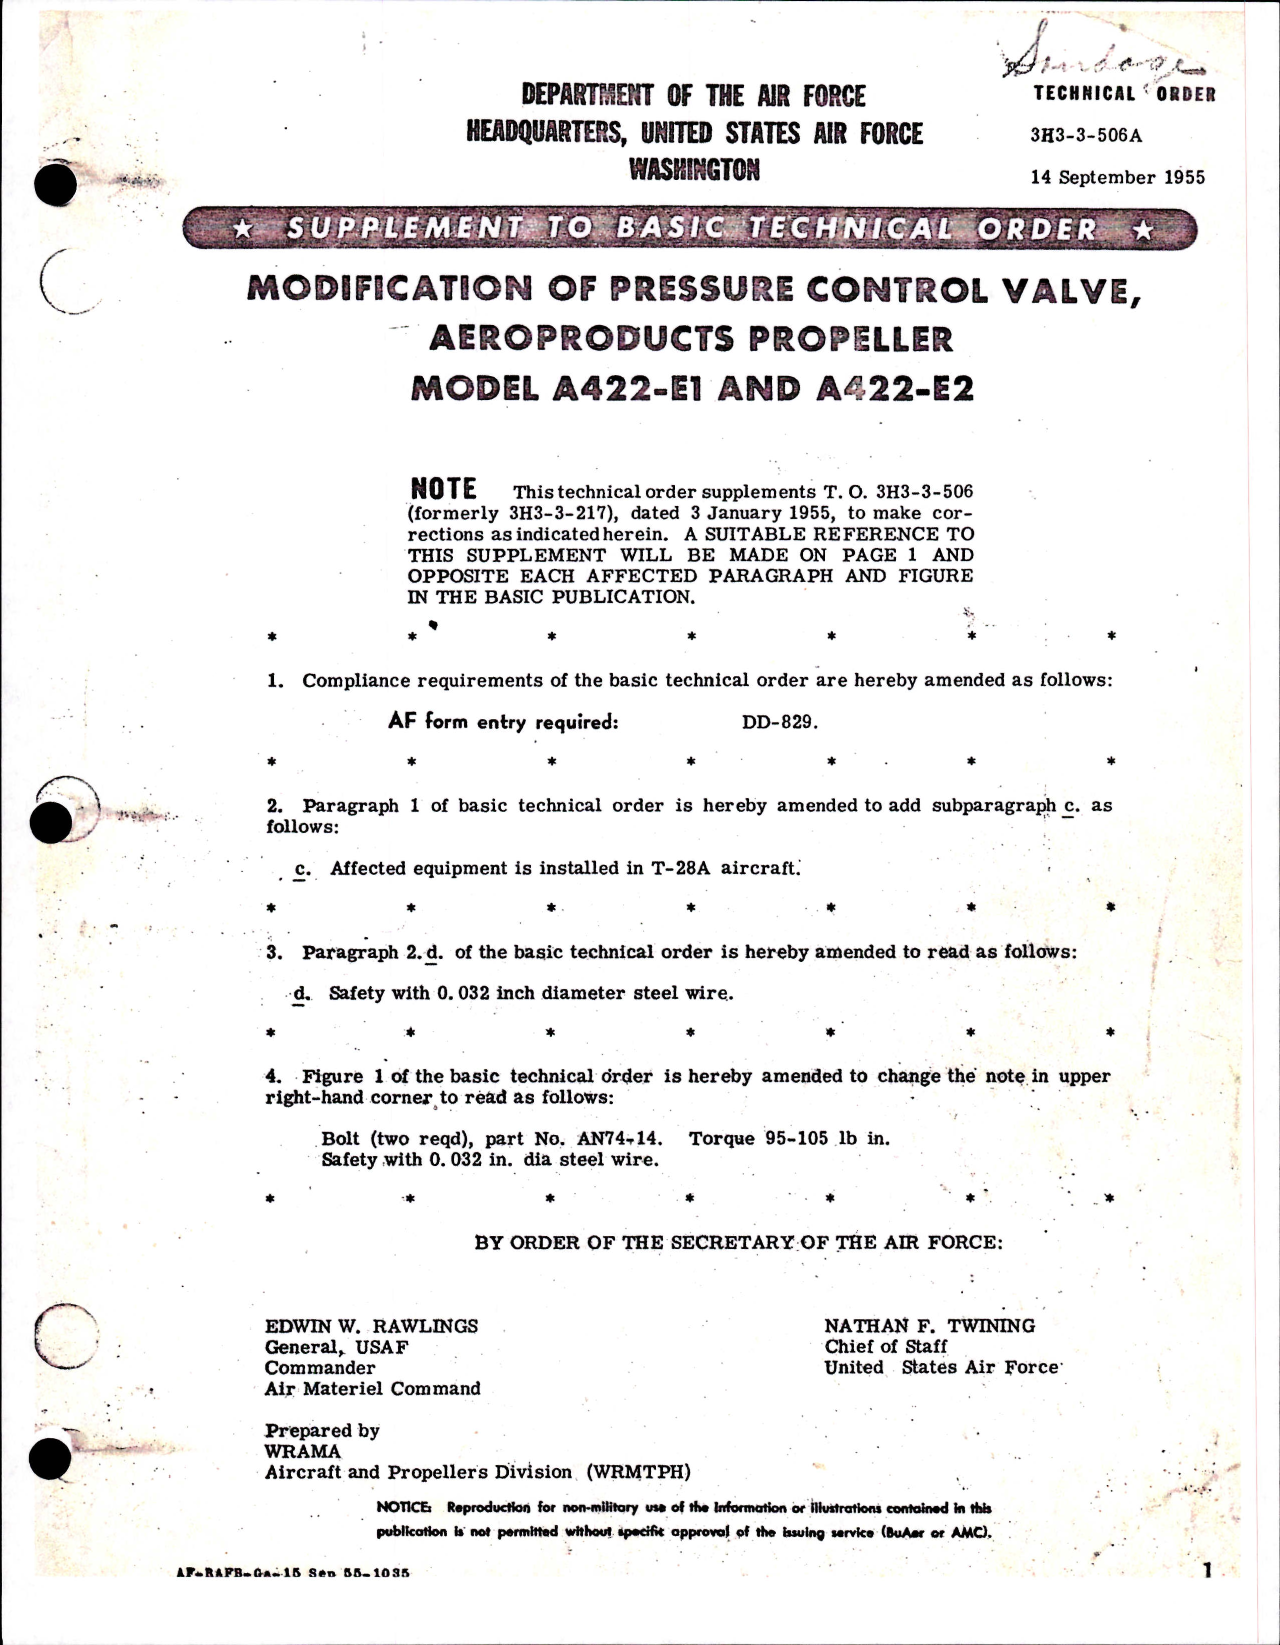 Sample page 1 from AirCorps Library document: Modification of Pressure Control Valve for Aeroproducts Propeller Model A422-E1 and A-422-E2